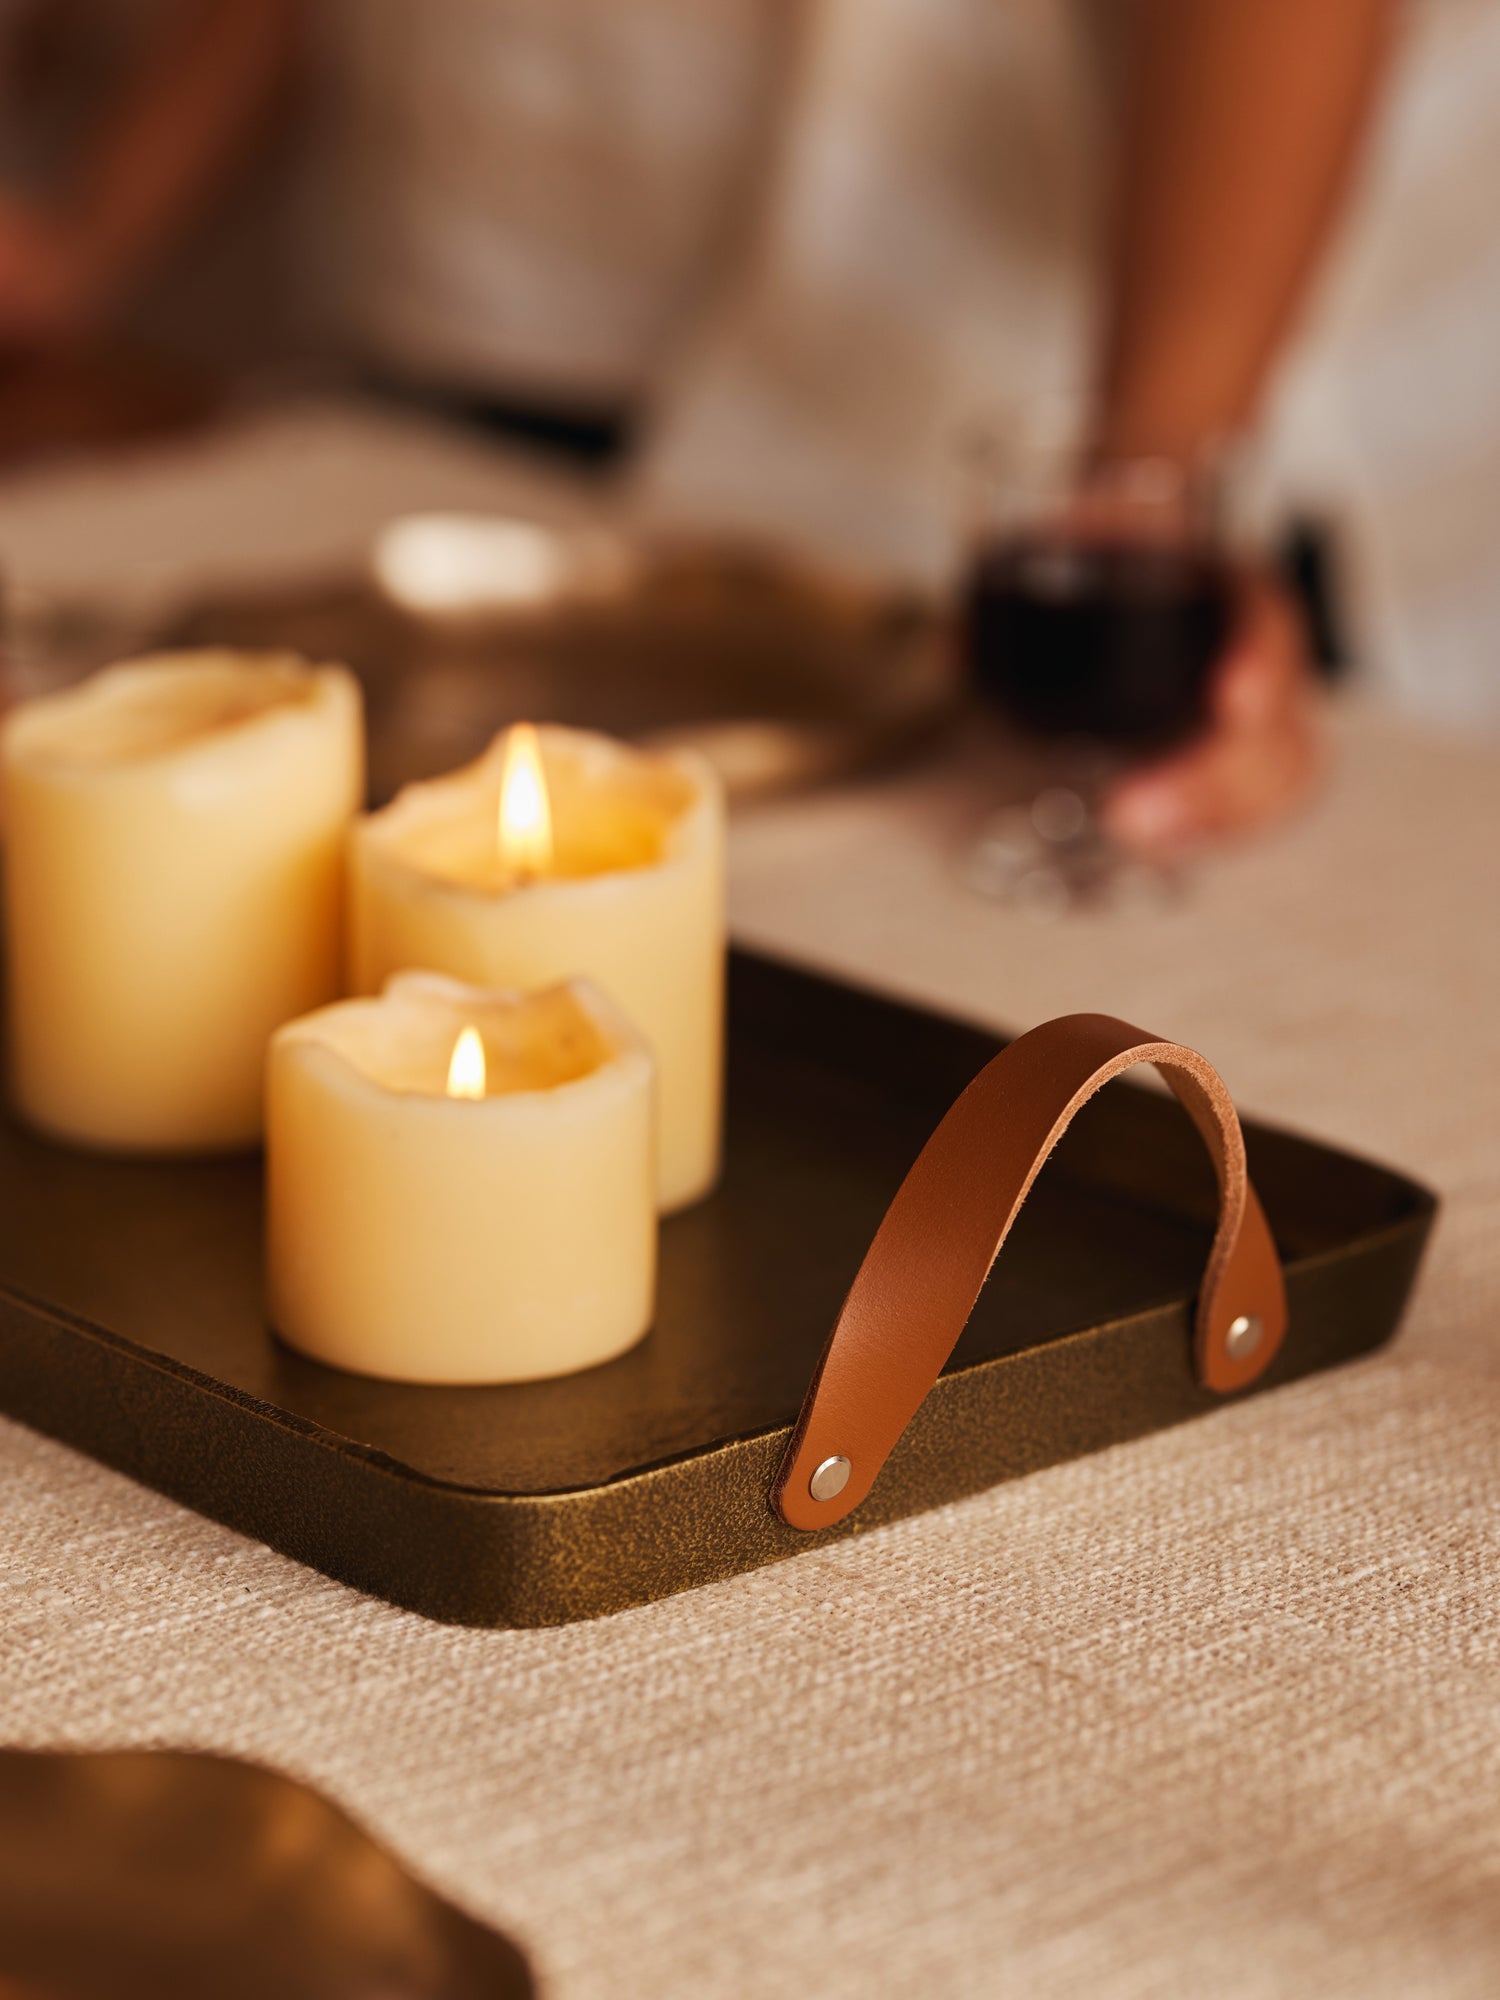 Umbra Tray with Leather Handles - Fleck